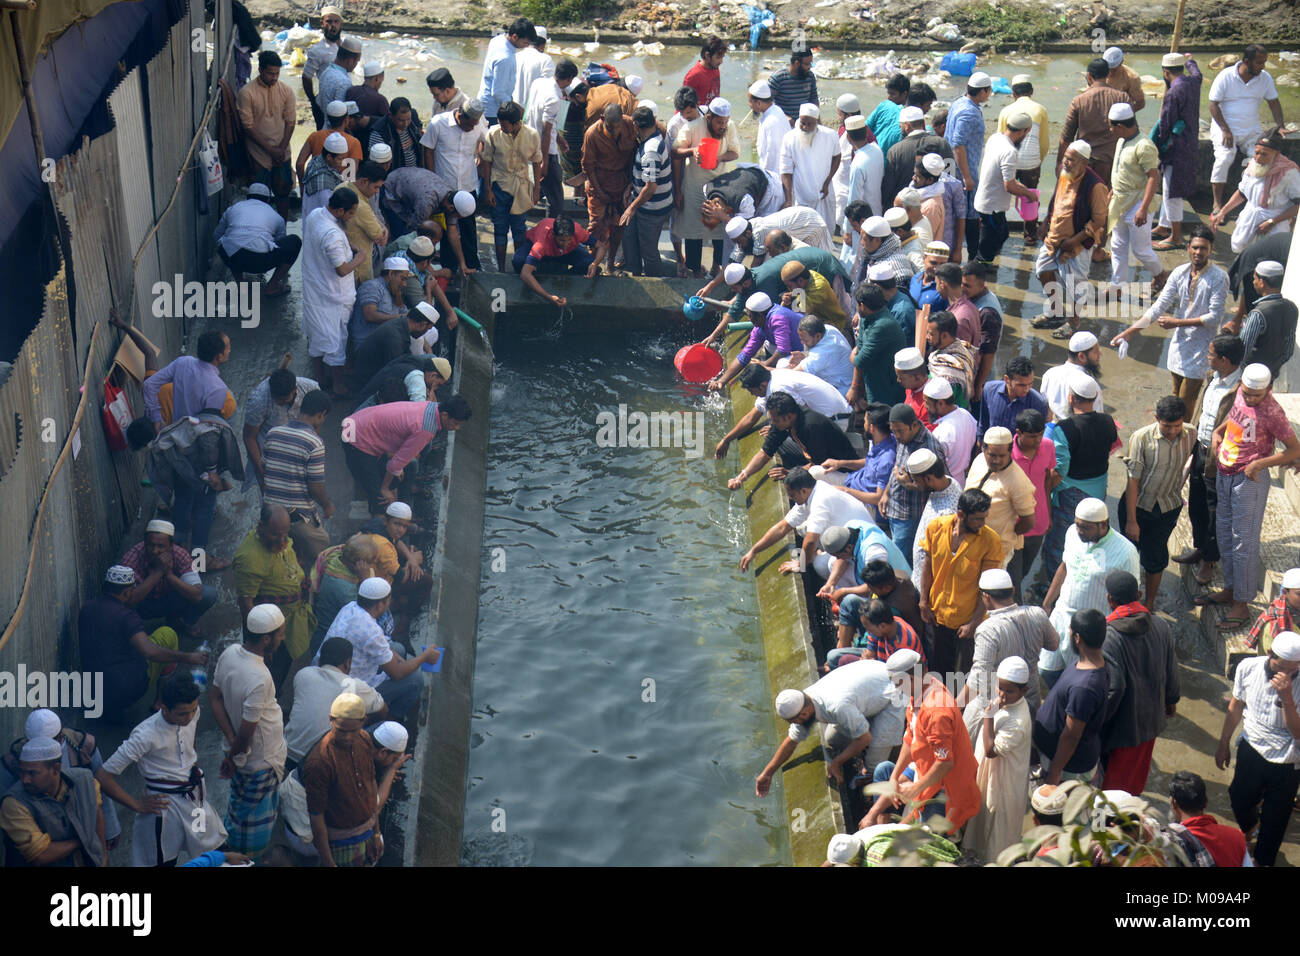 Dhaka, Bangladesh capital Dhaka. 19th Jan, 2018. Devotees attend the second phase of an annual Muslim congregation on the bank of the Turag river at Tongi, on the outskirts of Bangladesh capital Dhaka, on Jan. 19, 2018. Credit: Salim Reza/Xinhua/Alamy Live News Stock Photo